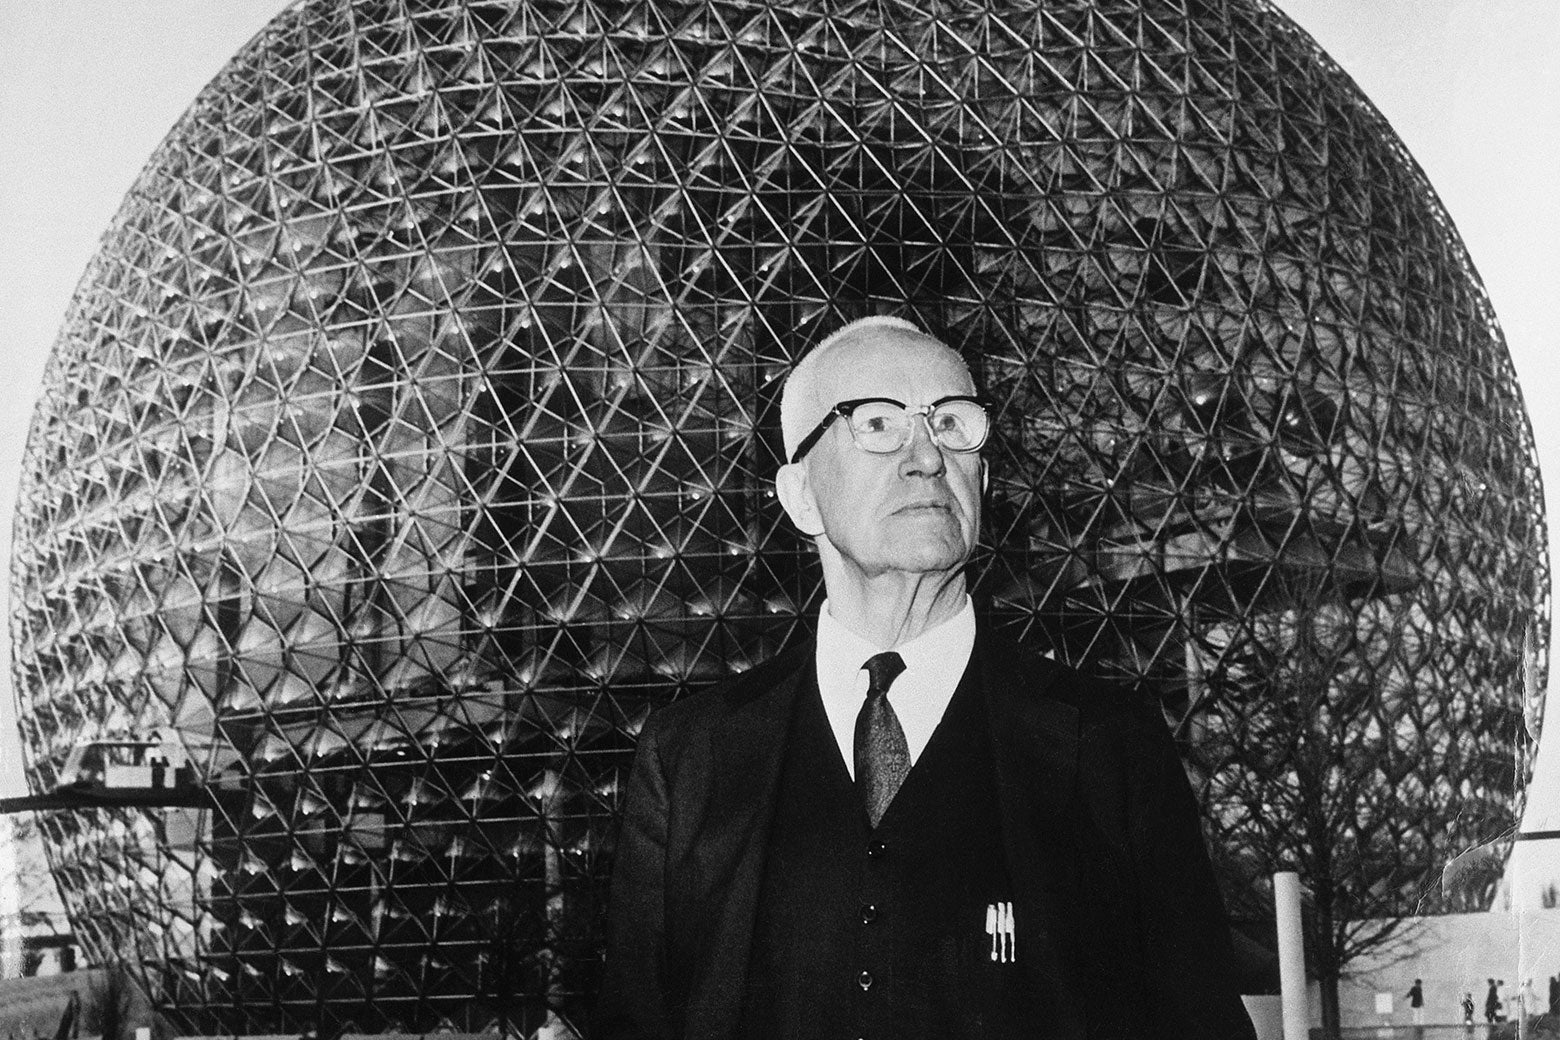 Buckminster Fuller dressed in a suit and tie and wearing glasses gazes into the distance in this black and white photo of him in front of a geodesic dome at the 1967 World's Fair.